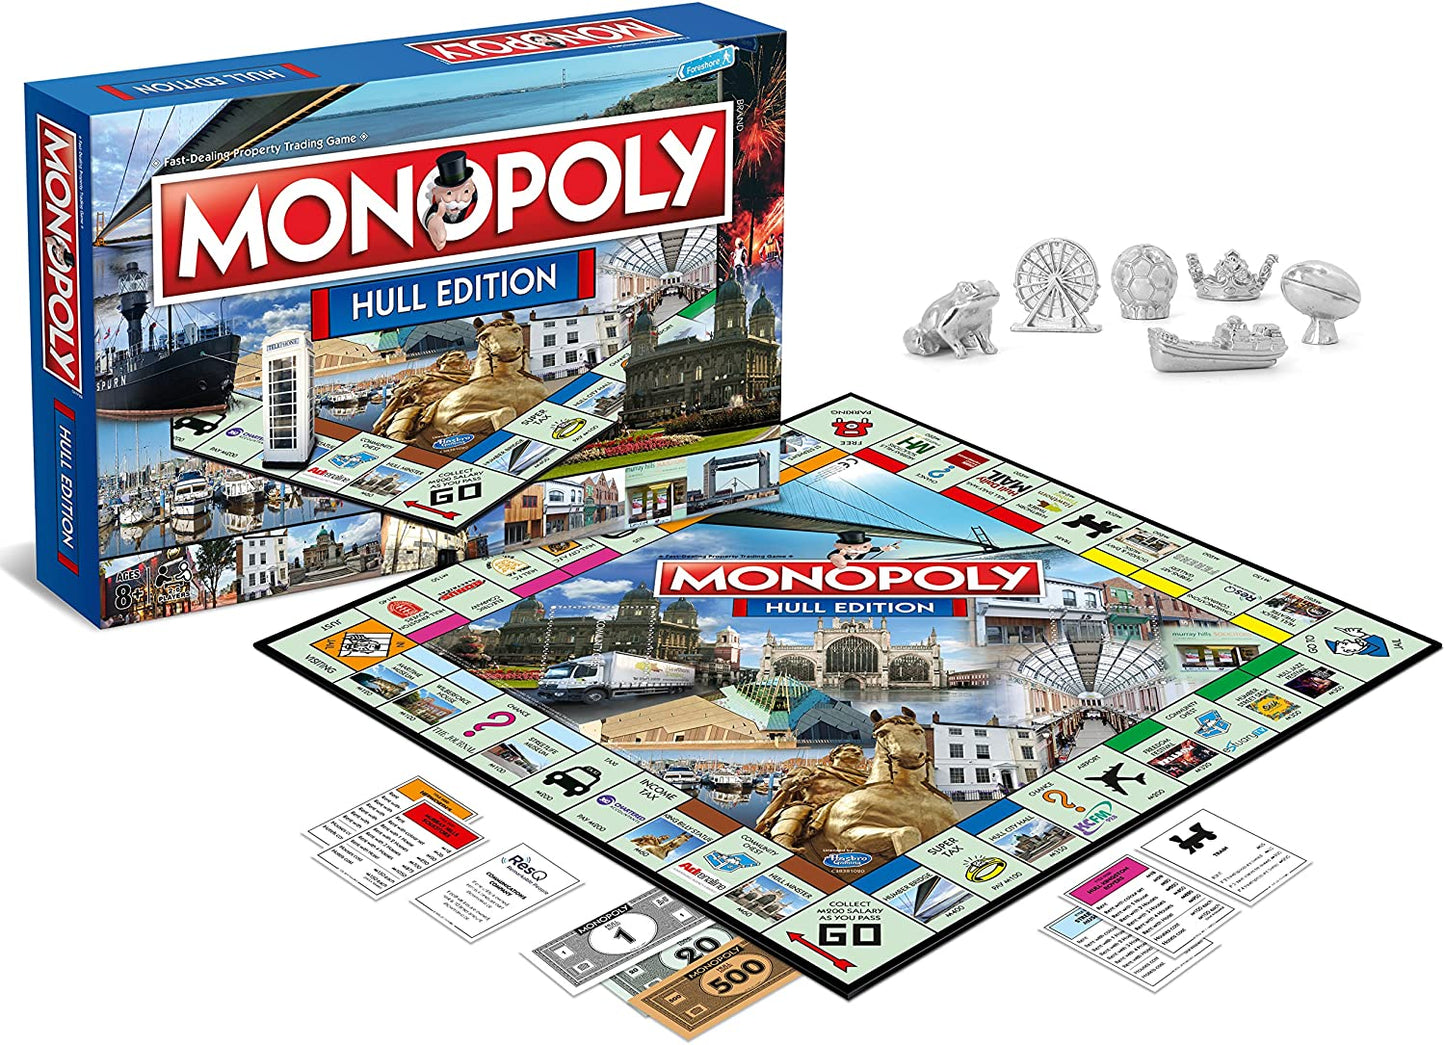 Monopoly Hull Edition Board Game - The Great Yorkshire Shop